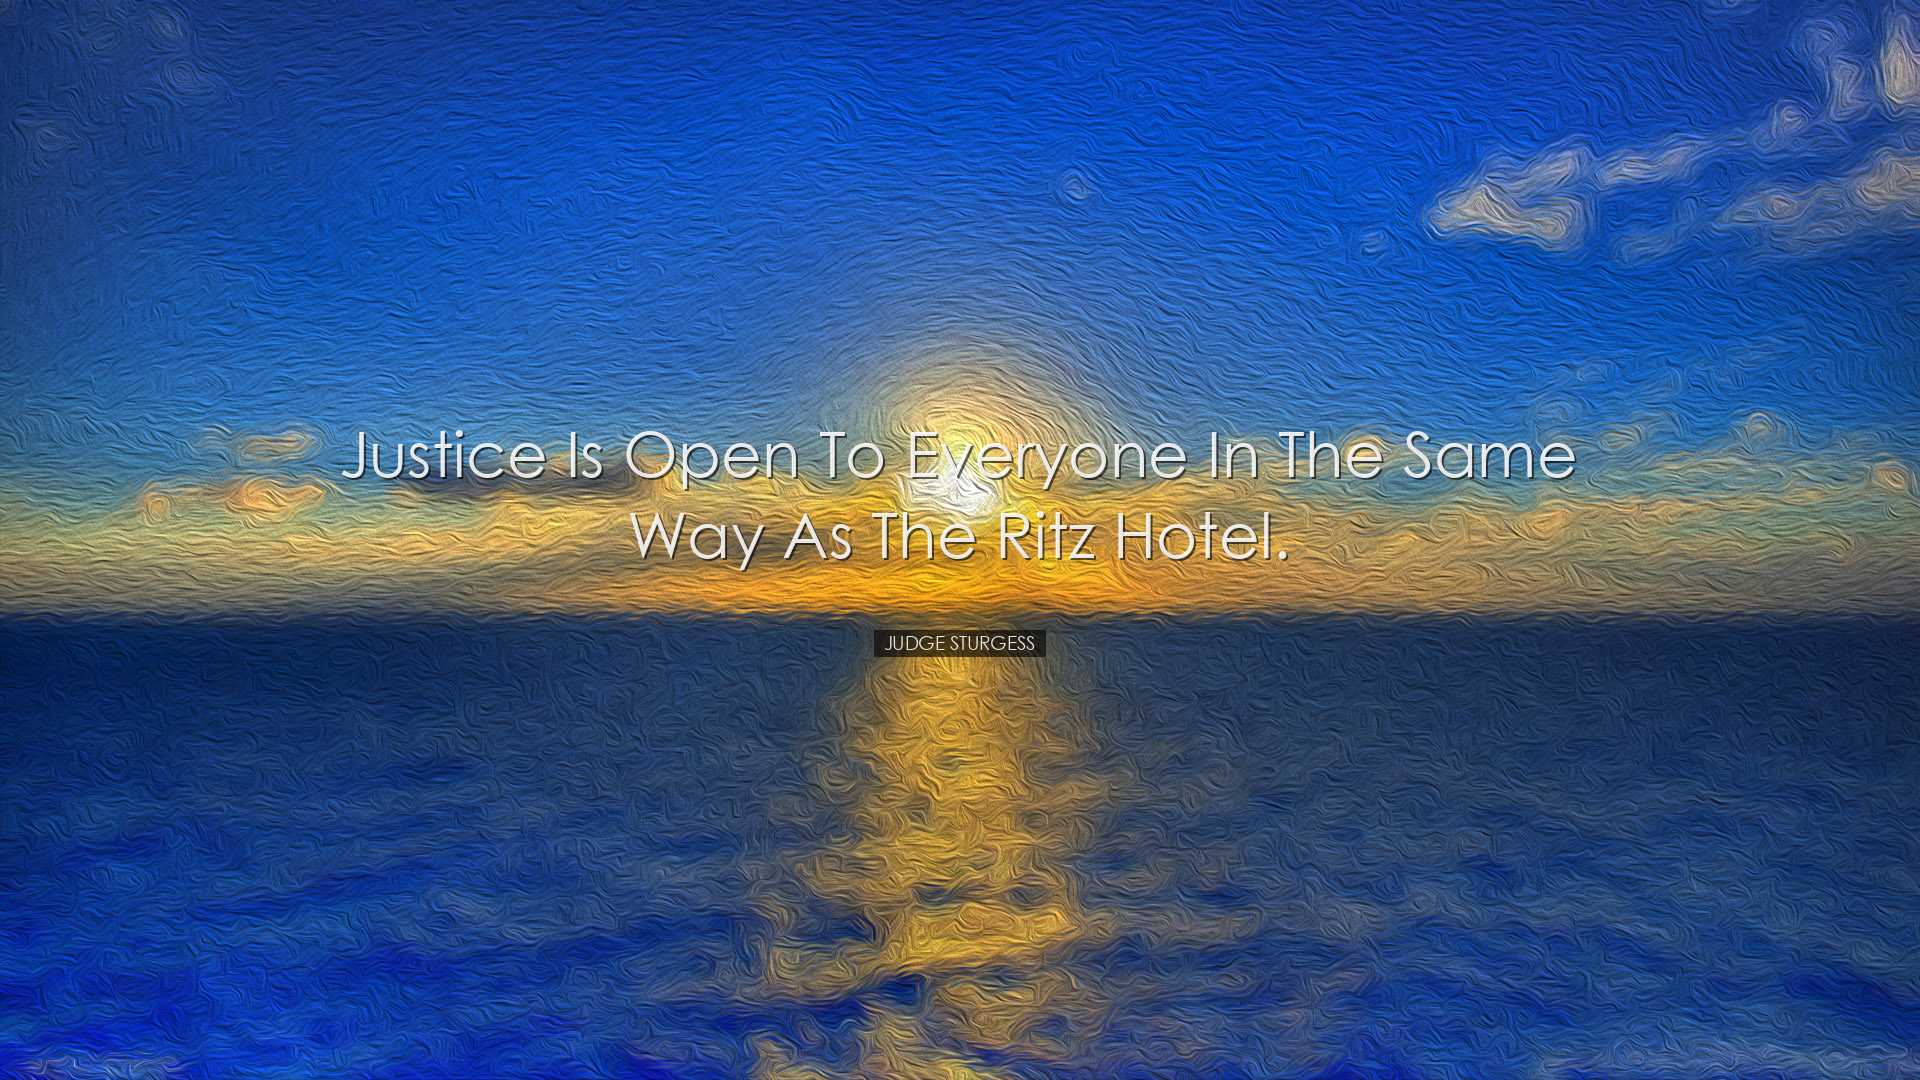 Justice is open to everyone in the same way as the Ritz Hotel. - J